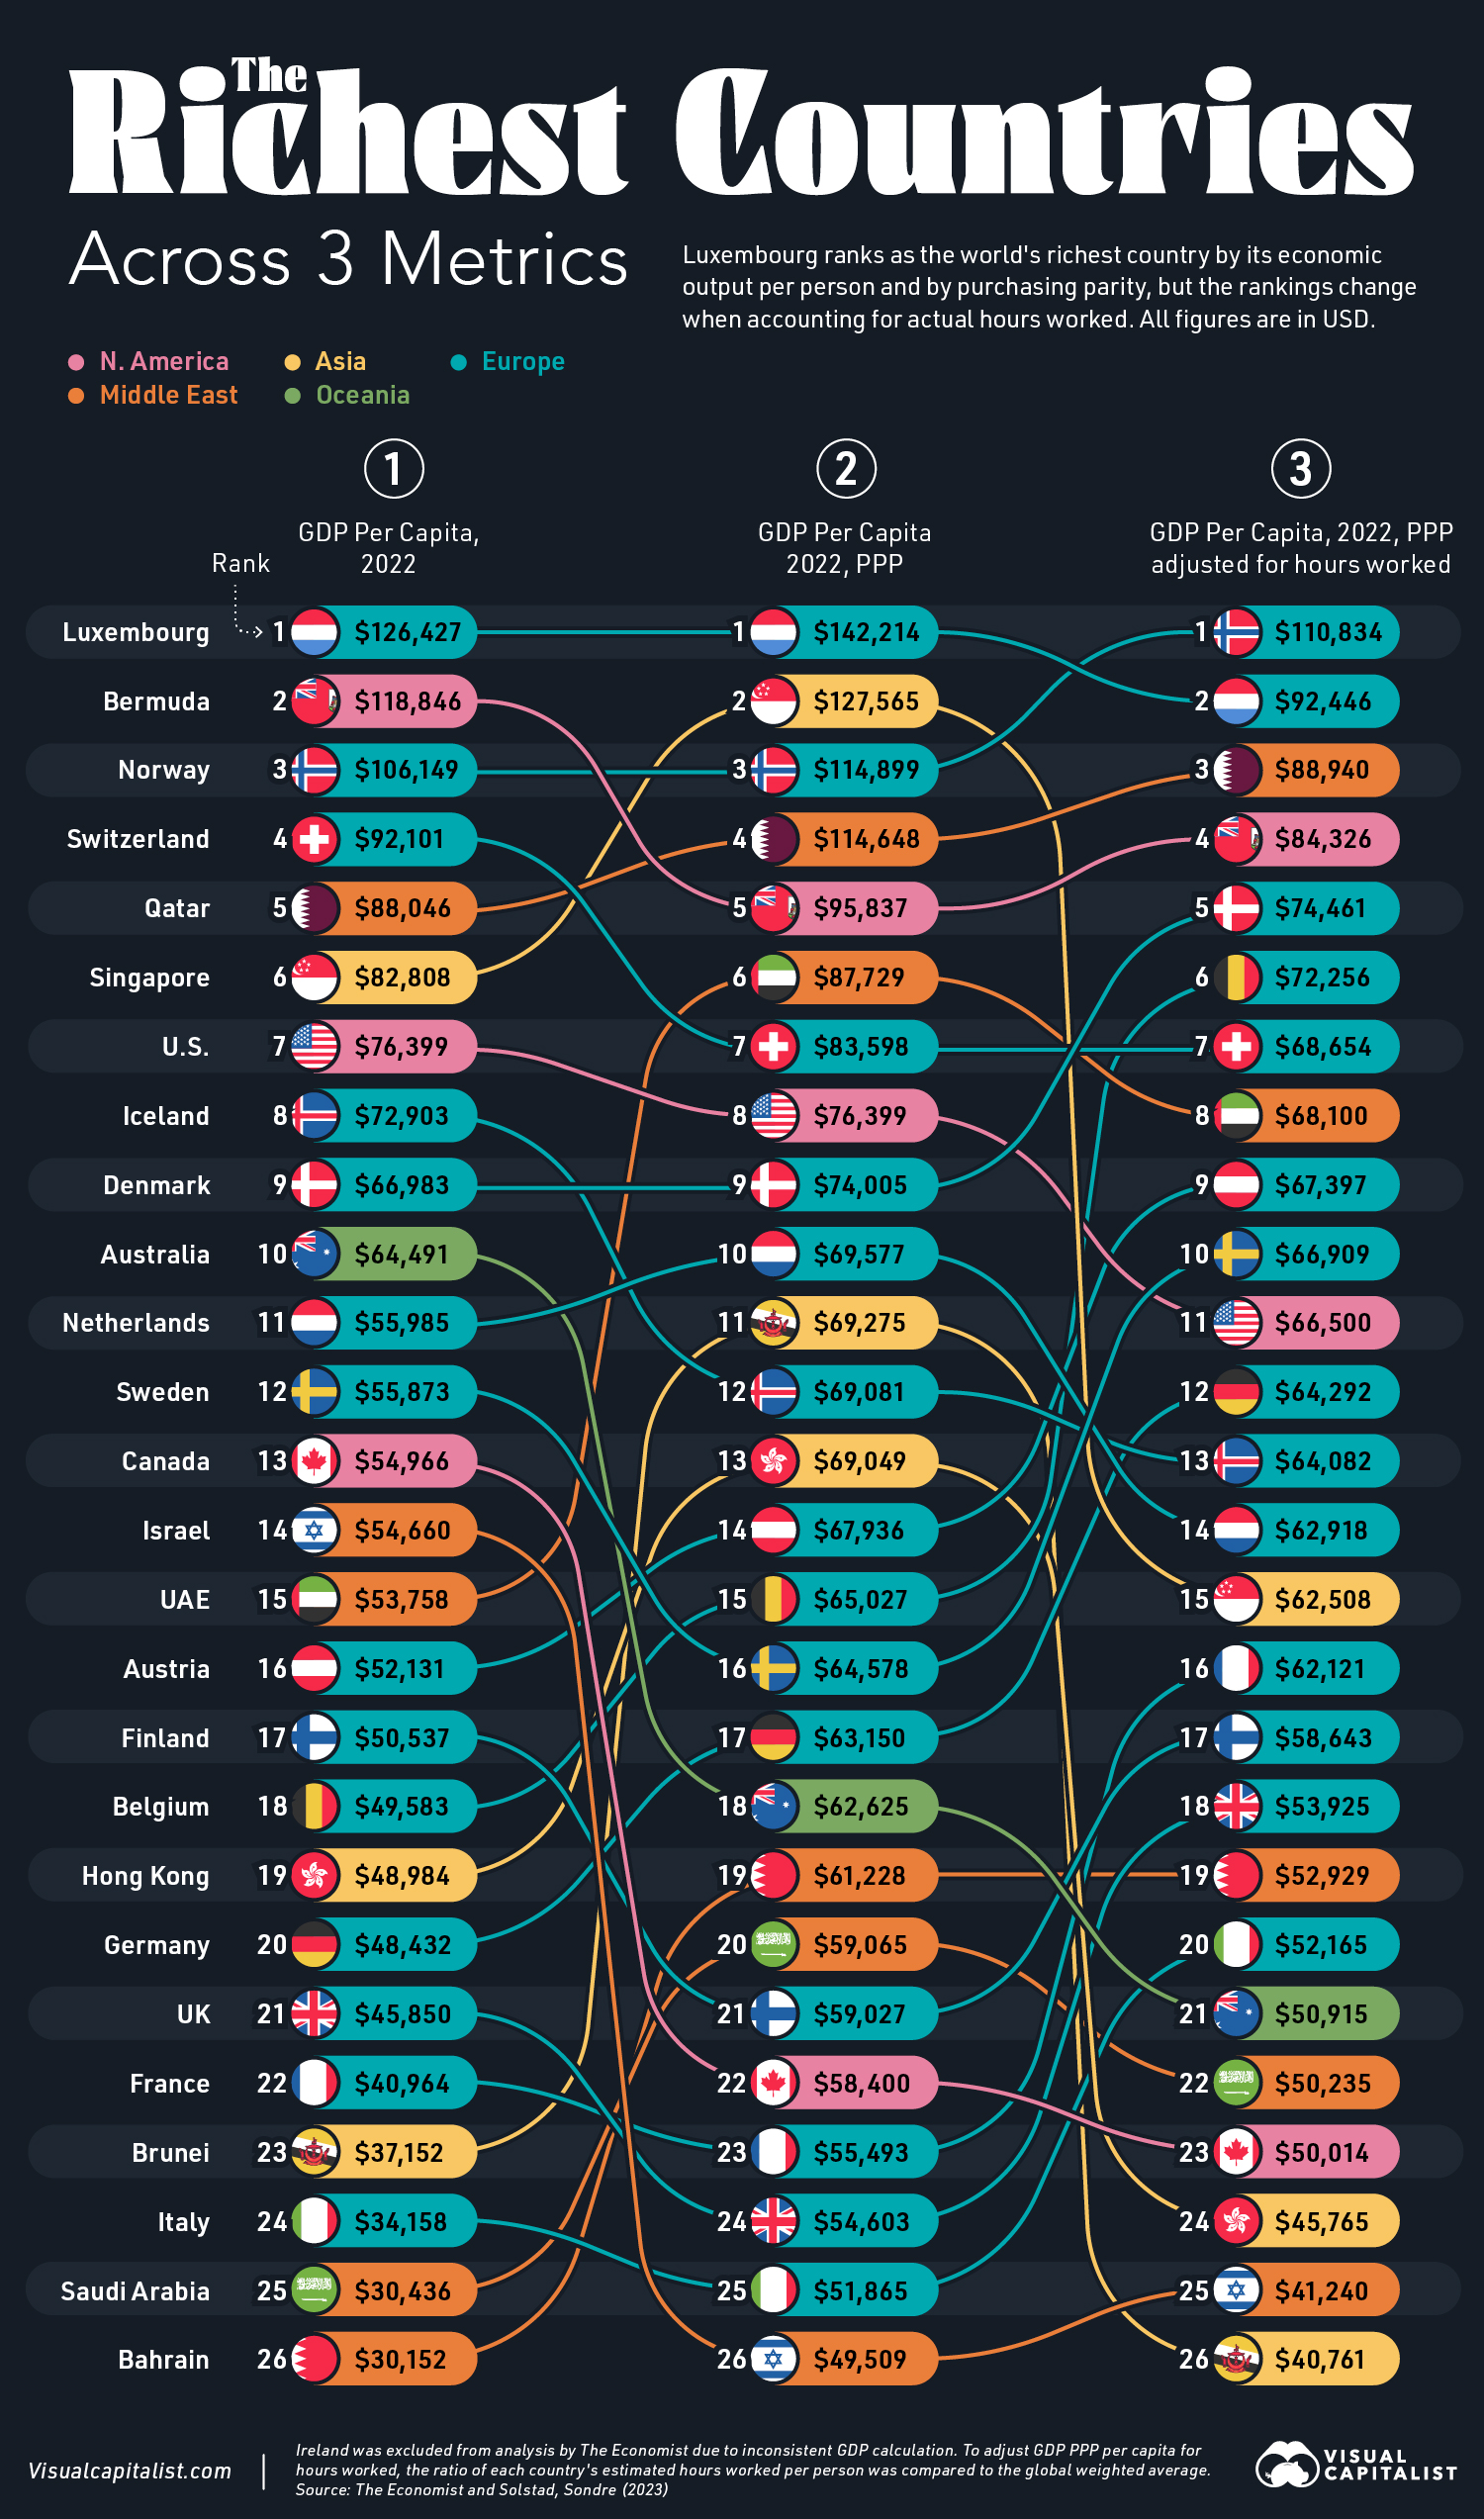 This graphic shows the richest countries in the world based on three measures of GDP.